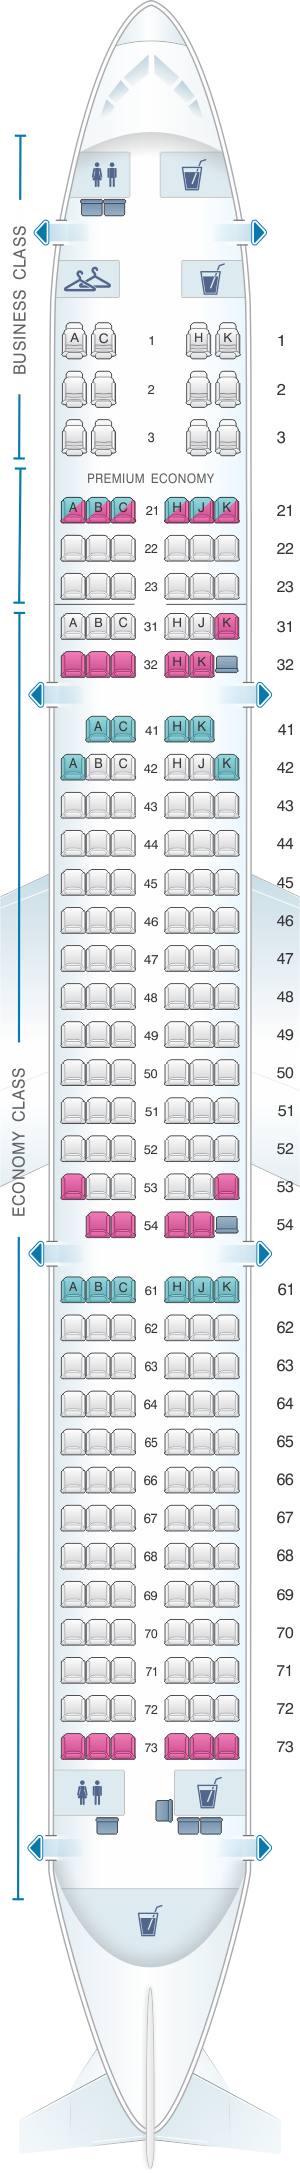 Seat Map Philippine Airlines Airbus A321 200ceo | SeatMaestro